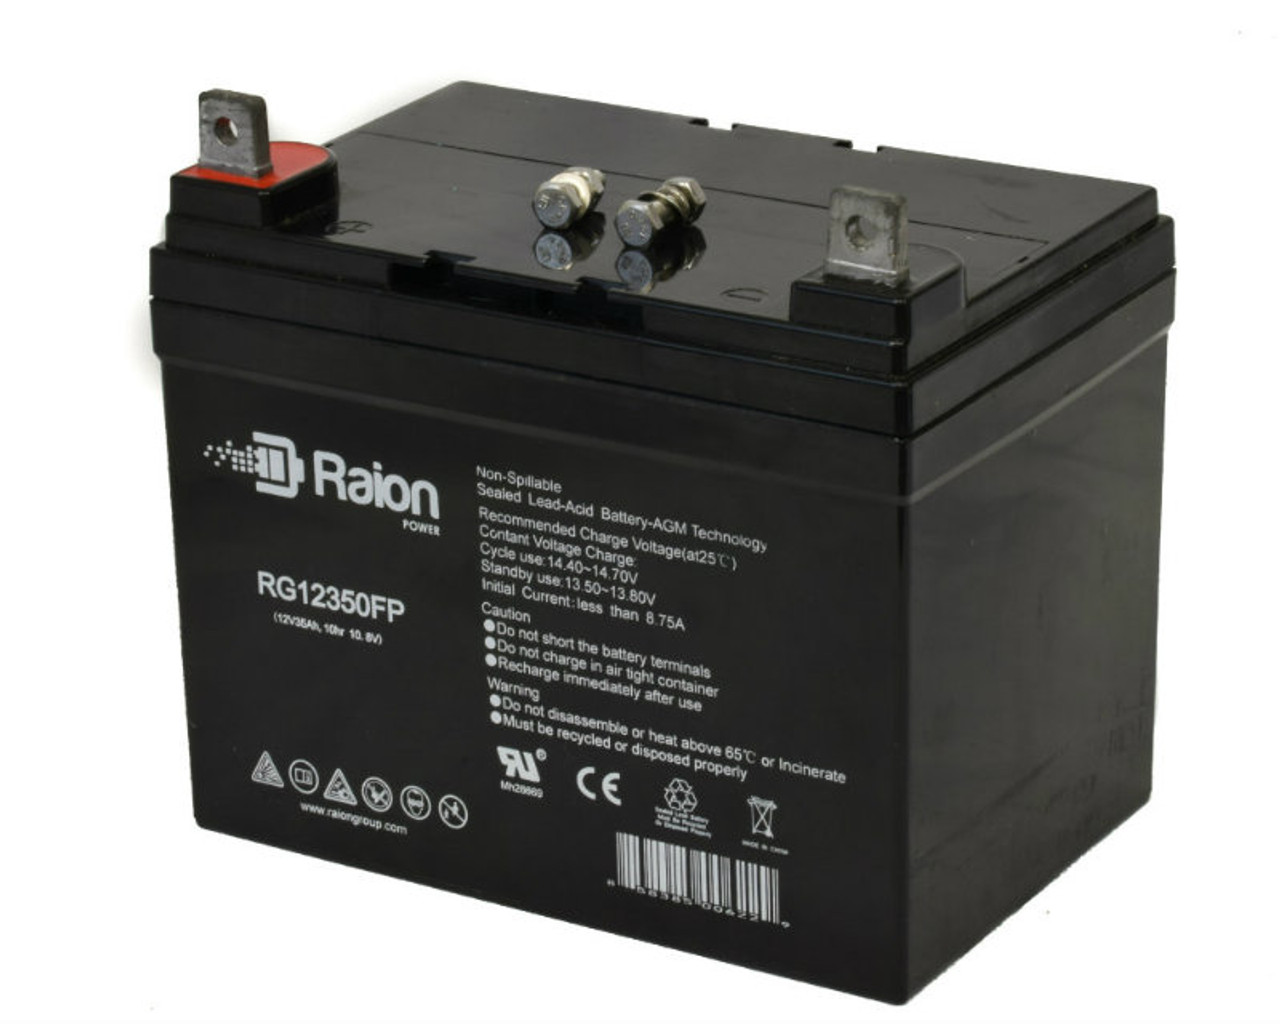 Raion Power Replacement 12V 35Ah Battery for J.I. Case & Case IH 110 - 1 Pack